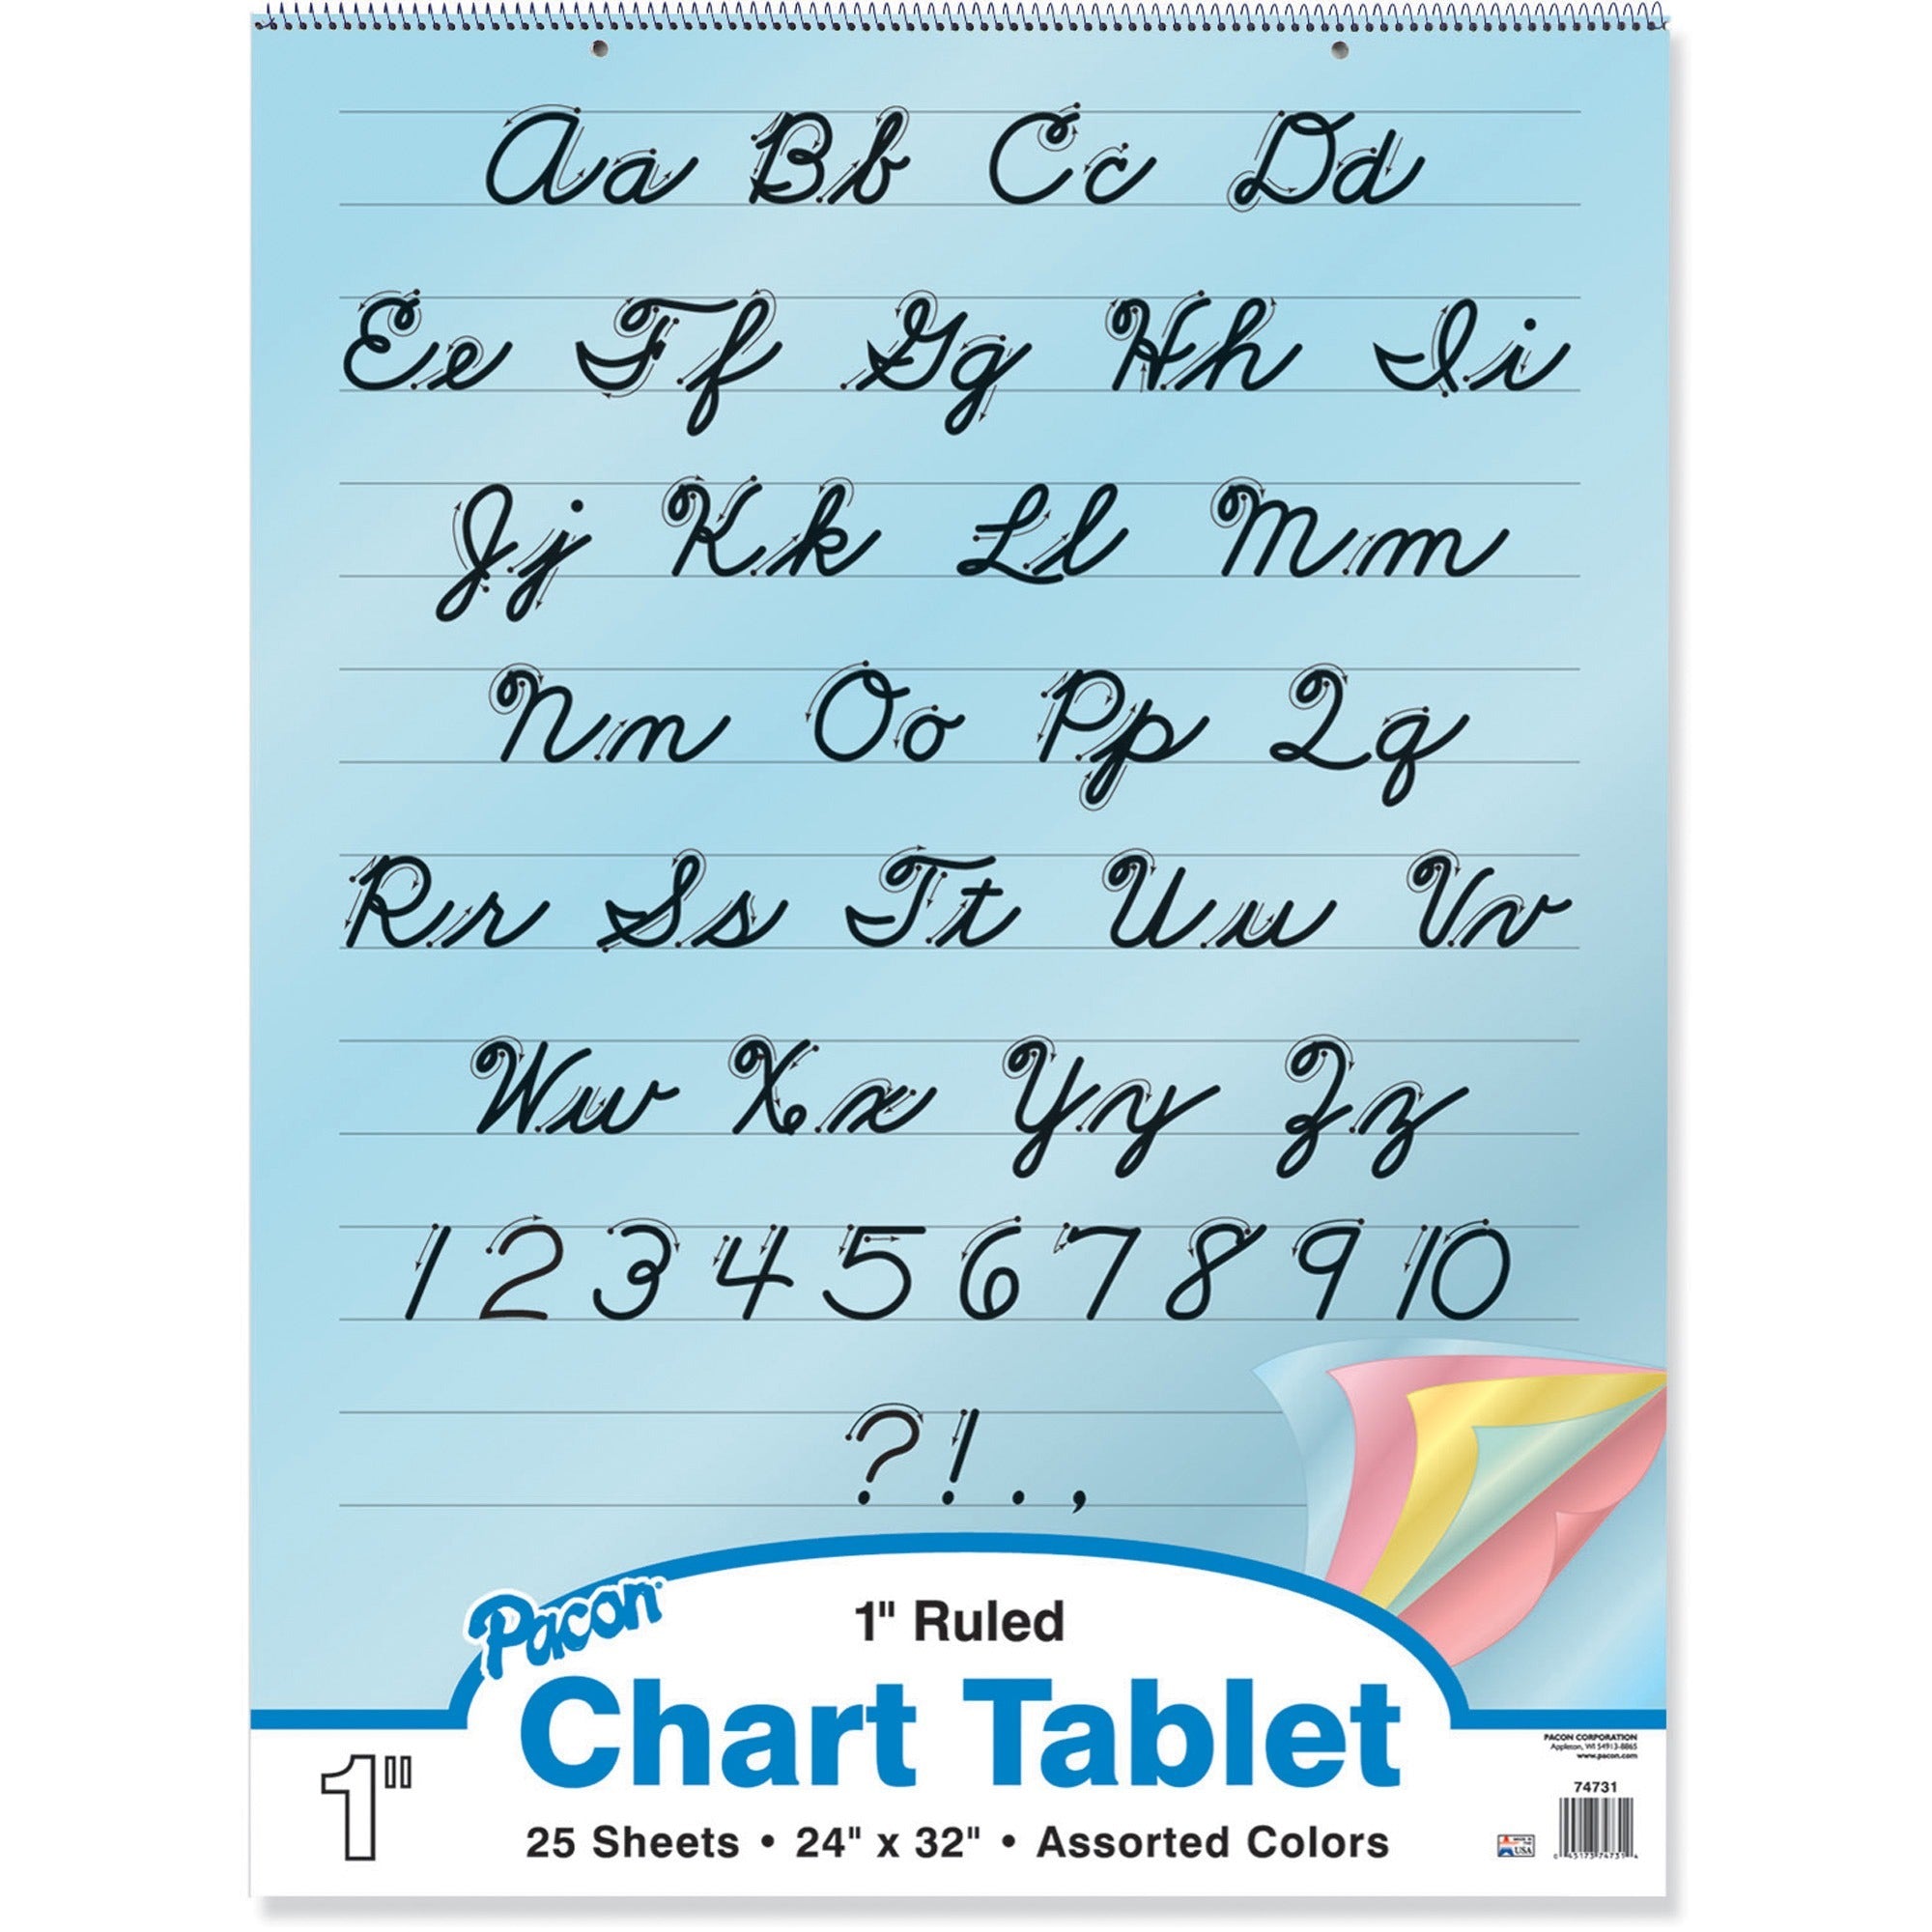 Pacon Cursive Cover Colored Paper Chart Tablet - 25 Sheets - 1" Ruled - 24" x 32"24" x 32" - Assorted Paper - Recycled - 1 Each